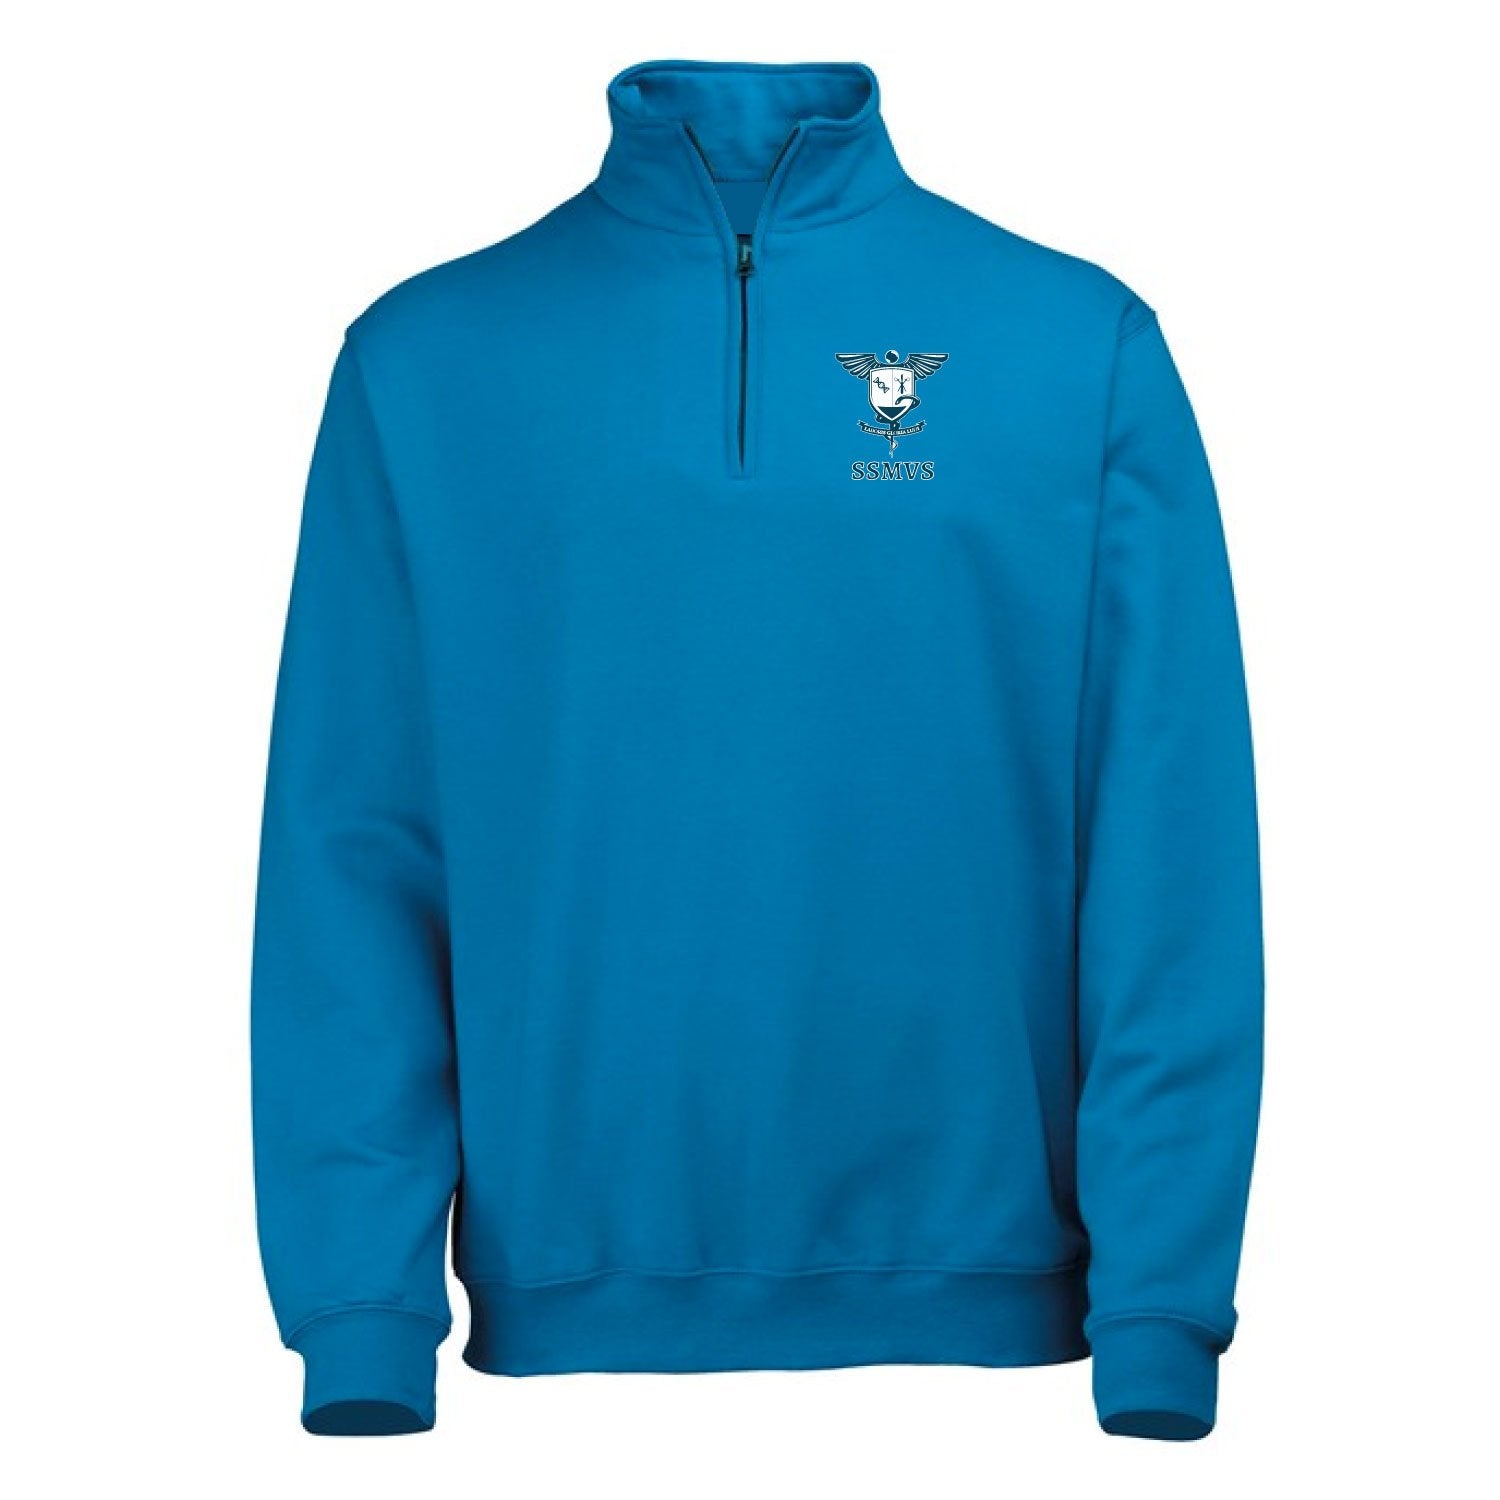 sidney sussex medical and veterinary society quater zip sweatshirt sapphire